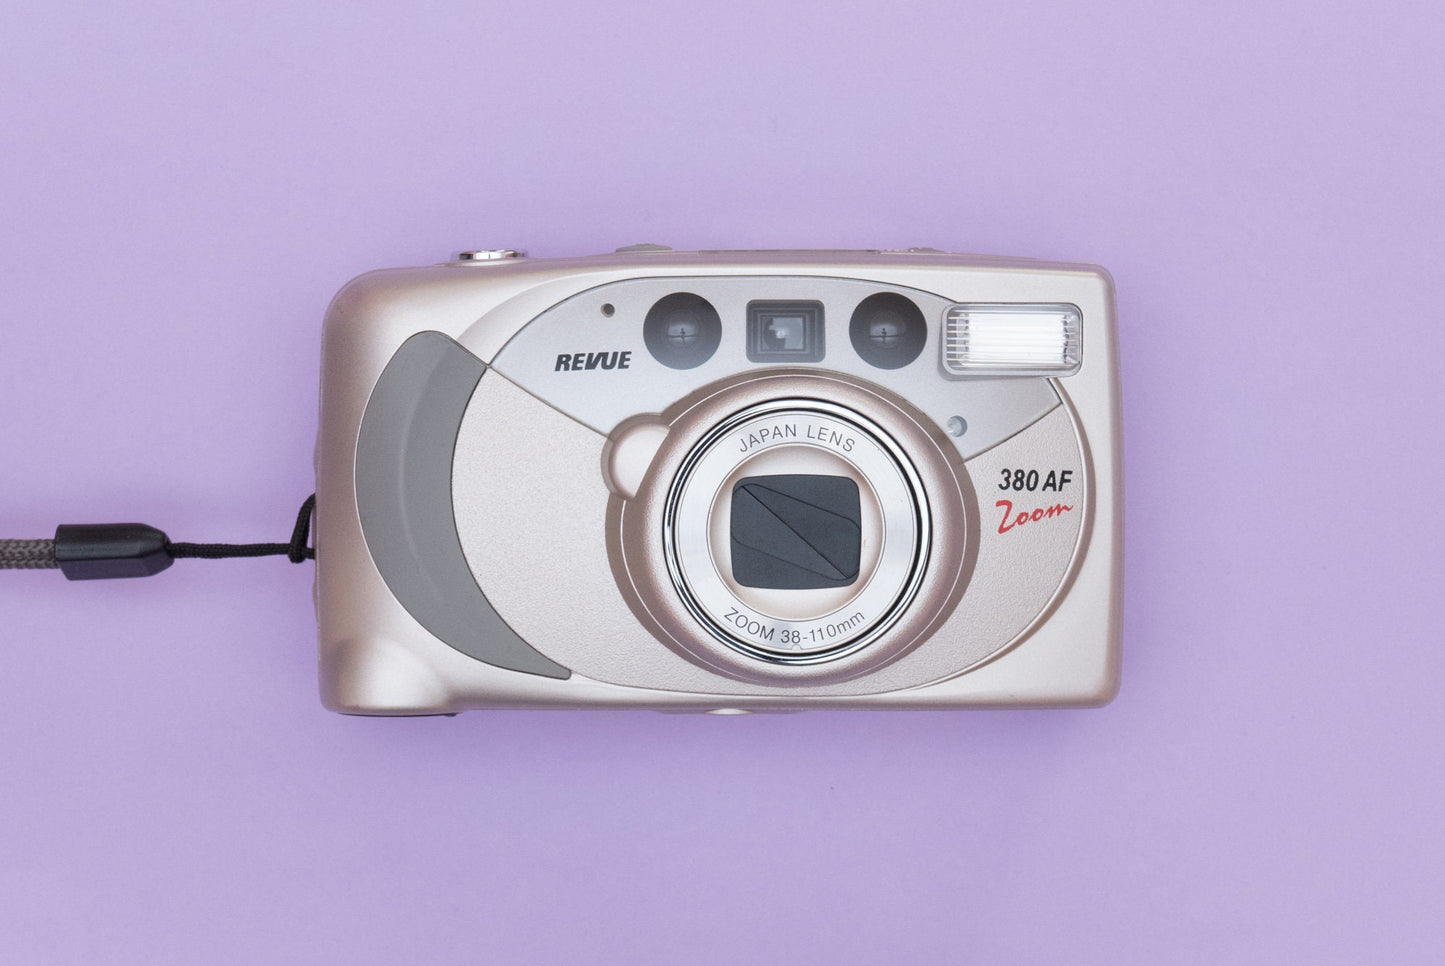 Revue 380 AF Zoom Compact Point and Shoot 35mm Film Camera